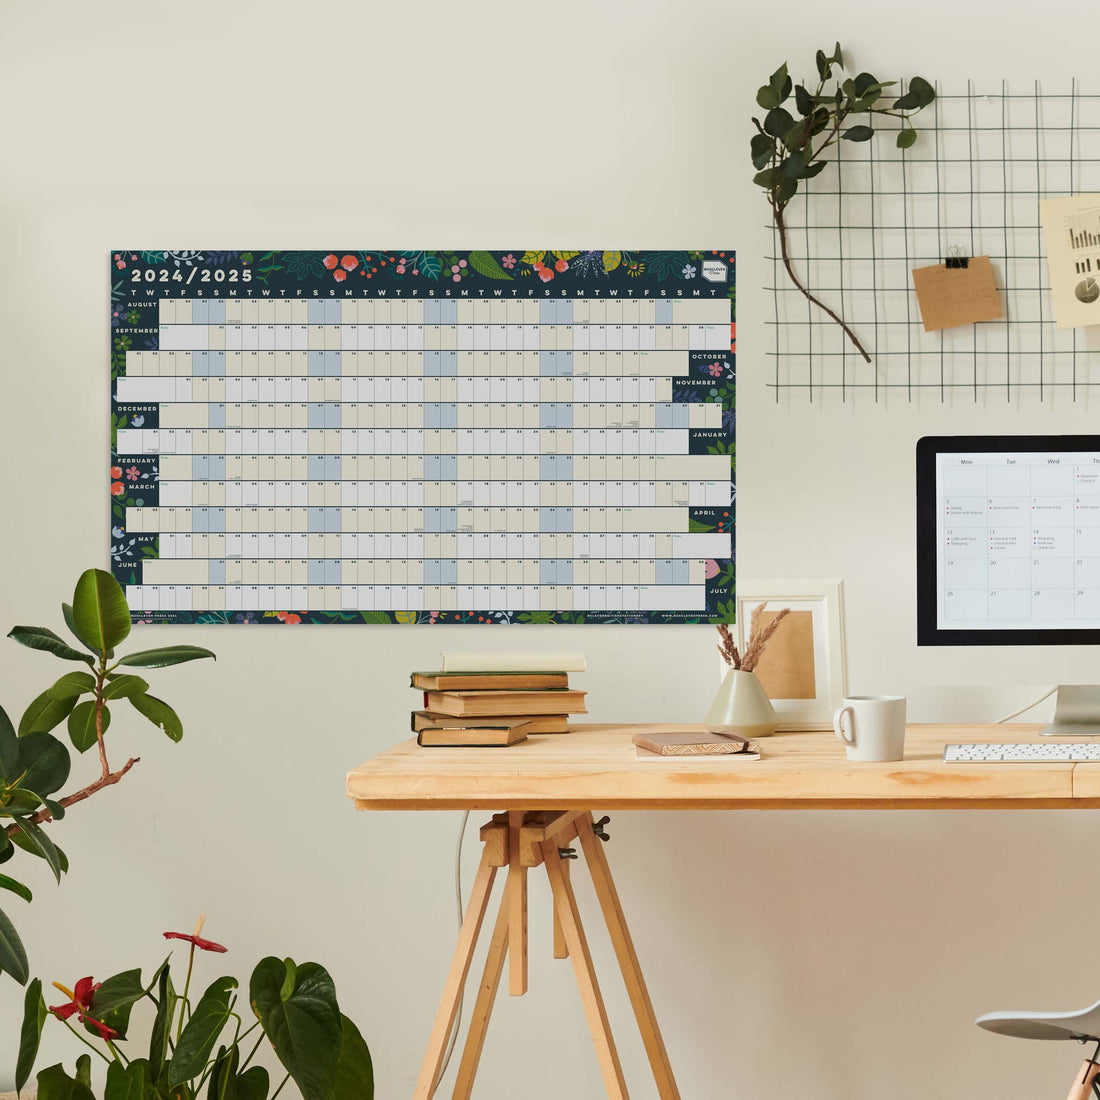 Academic wall planner with leaf design hung above a wooden table